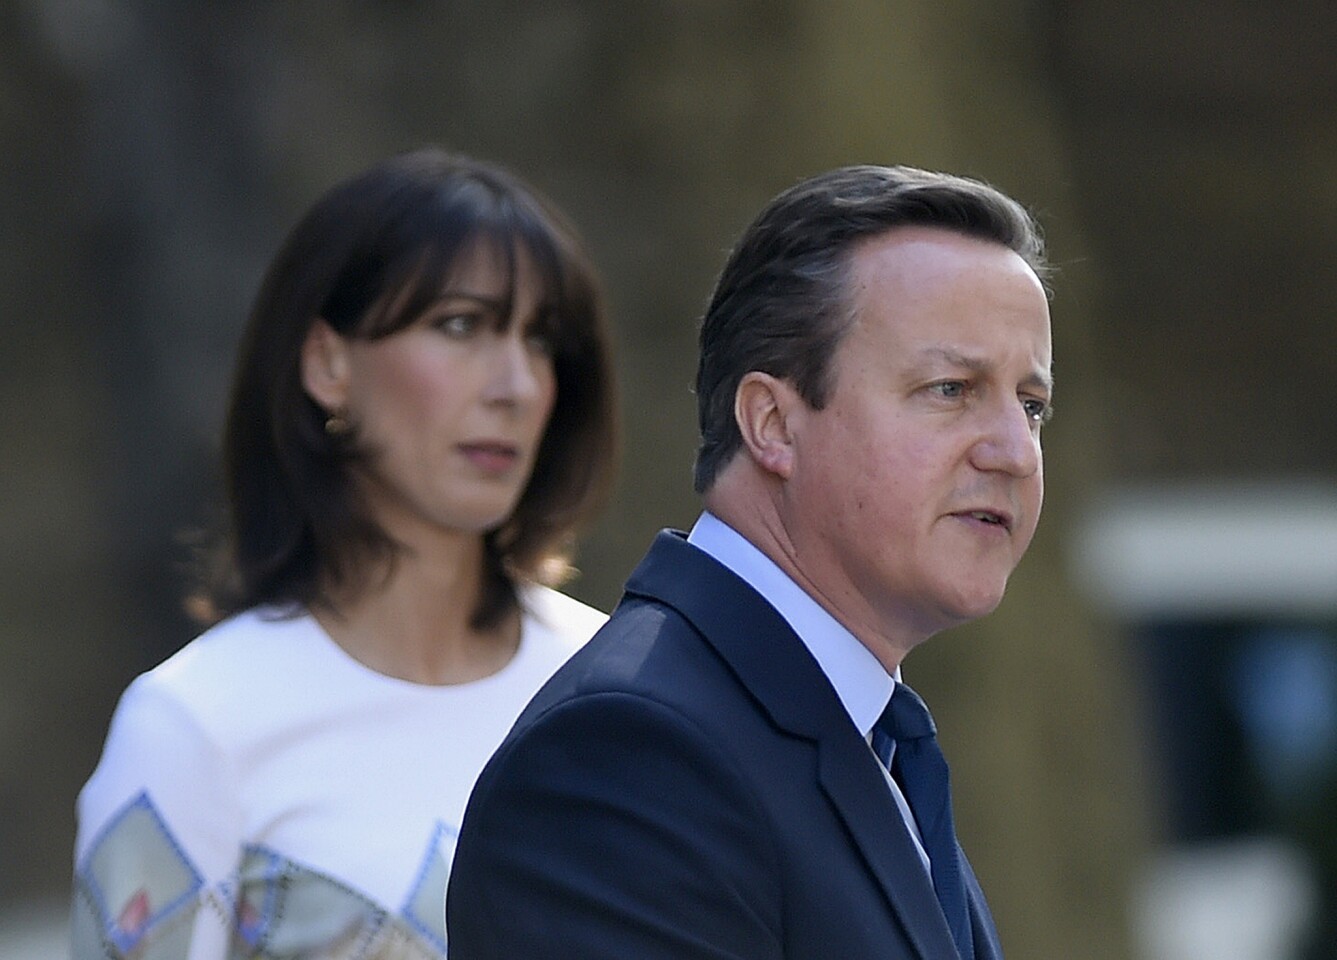 Britain's Prime Minister David Cameron speaks outside 10 Downing Street as his wife Samantha looks on Friday.